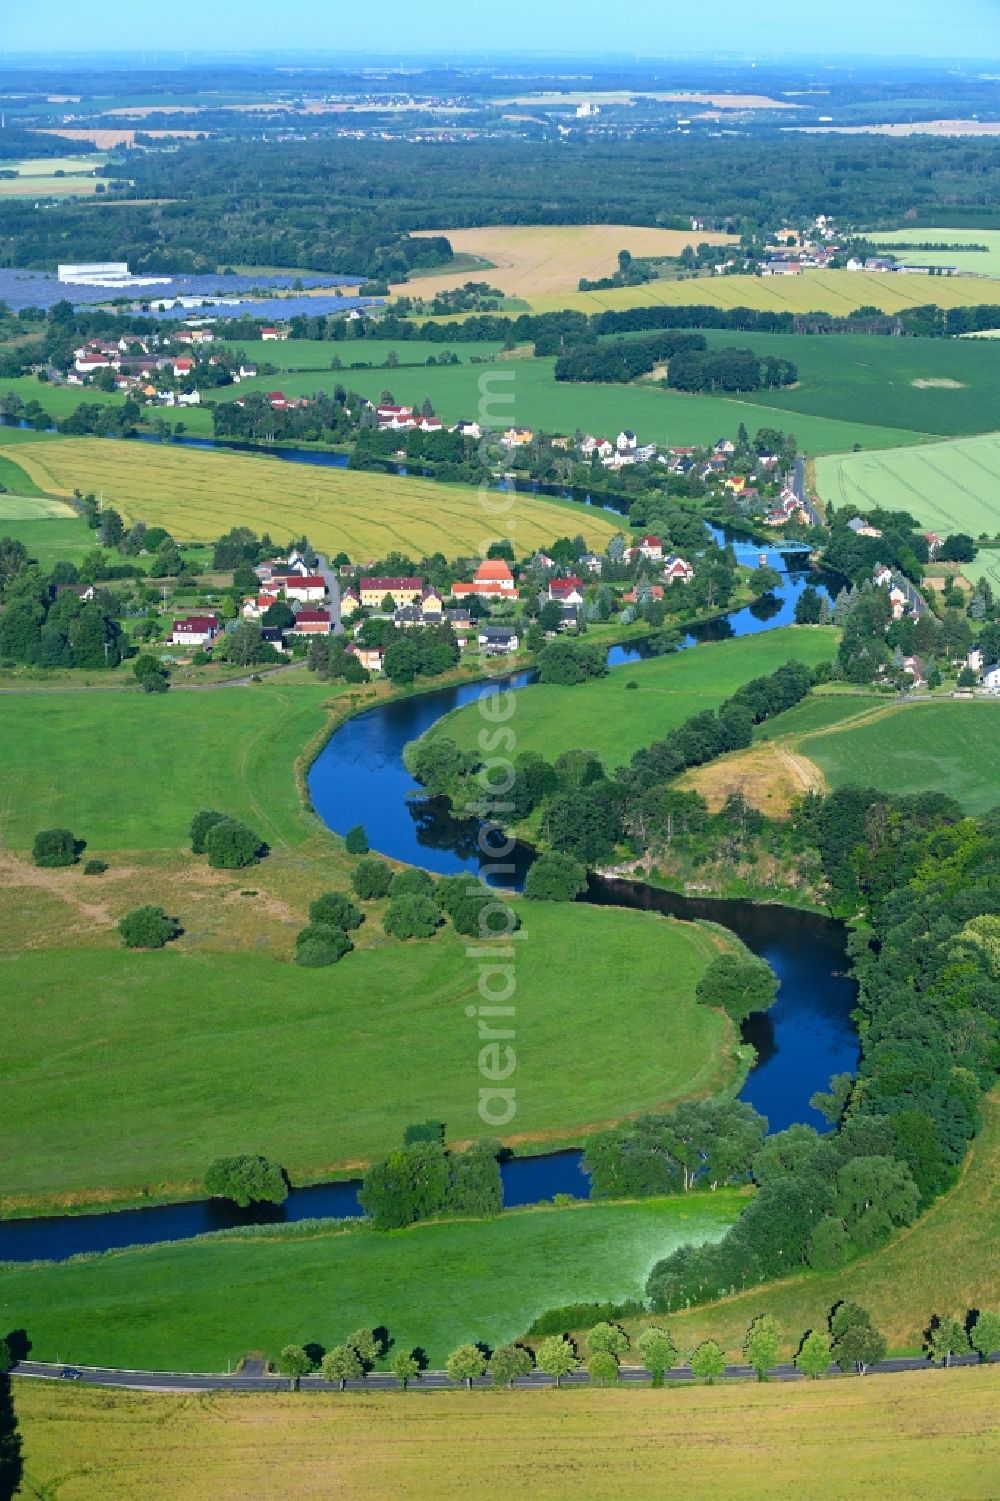 Polkenberg from the bird's eye view: Meandering, serpentine curve of river Freiberger Mulde in Polkenberg in the state Saxony, Germany